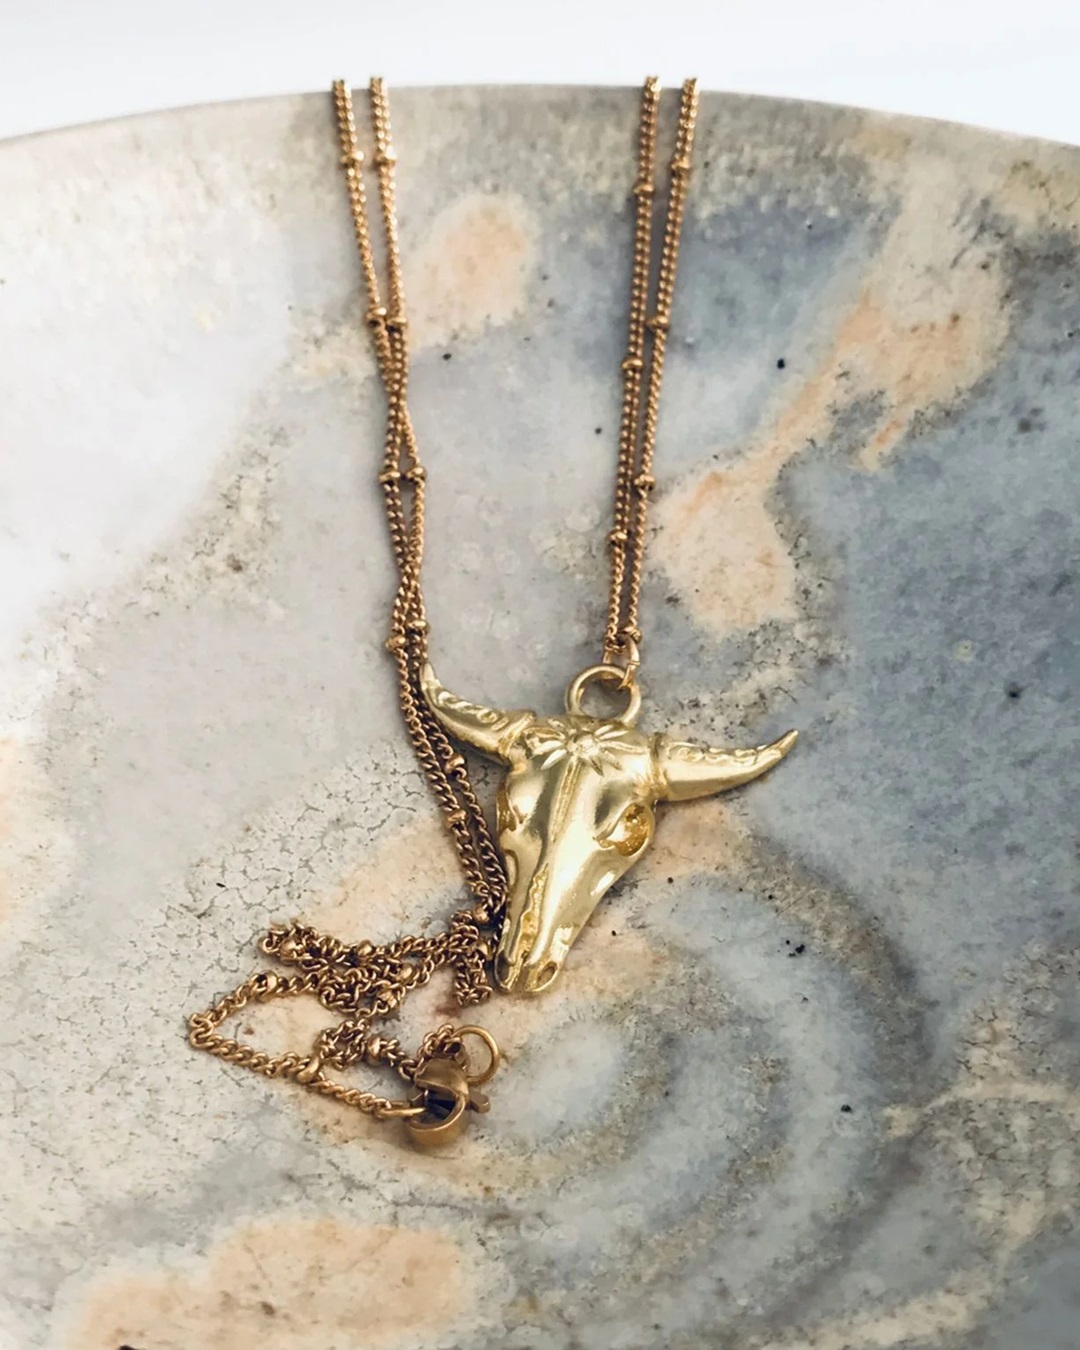 Bull gold necklace pendant on chain